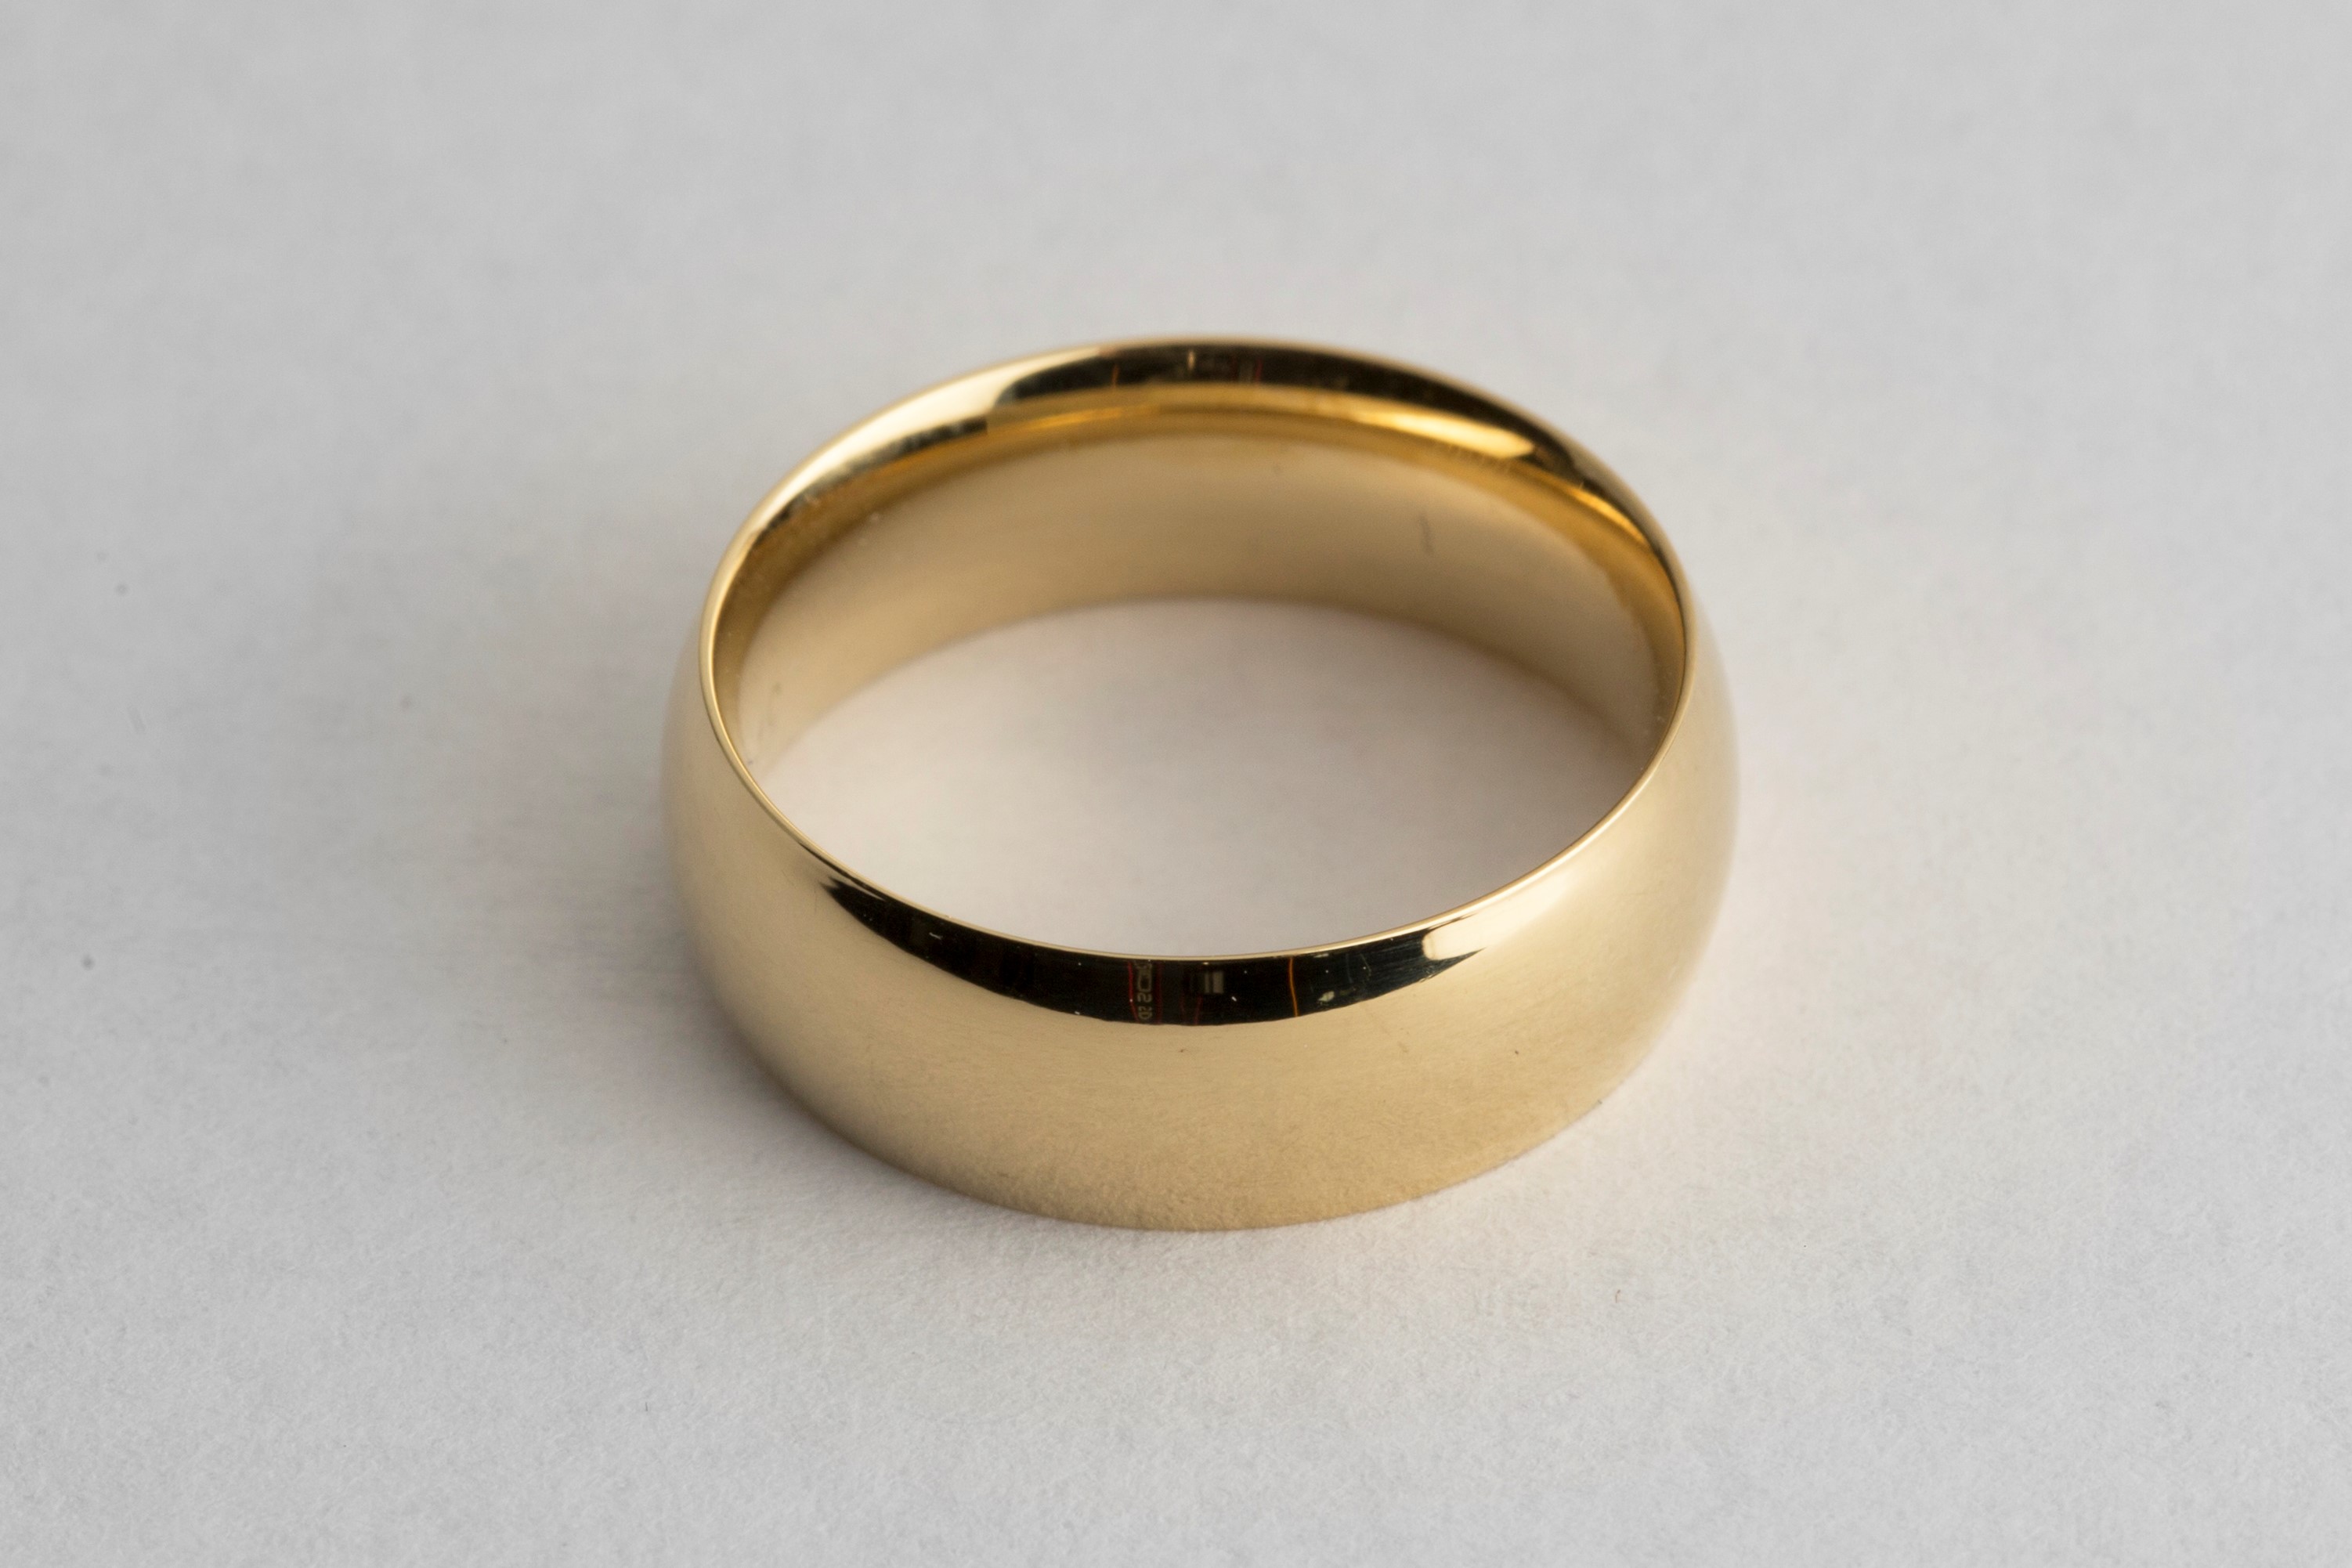 Gold wedding ring electroplated in 18k gold solution